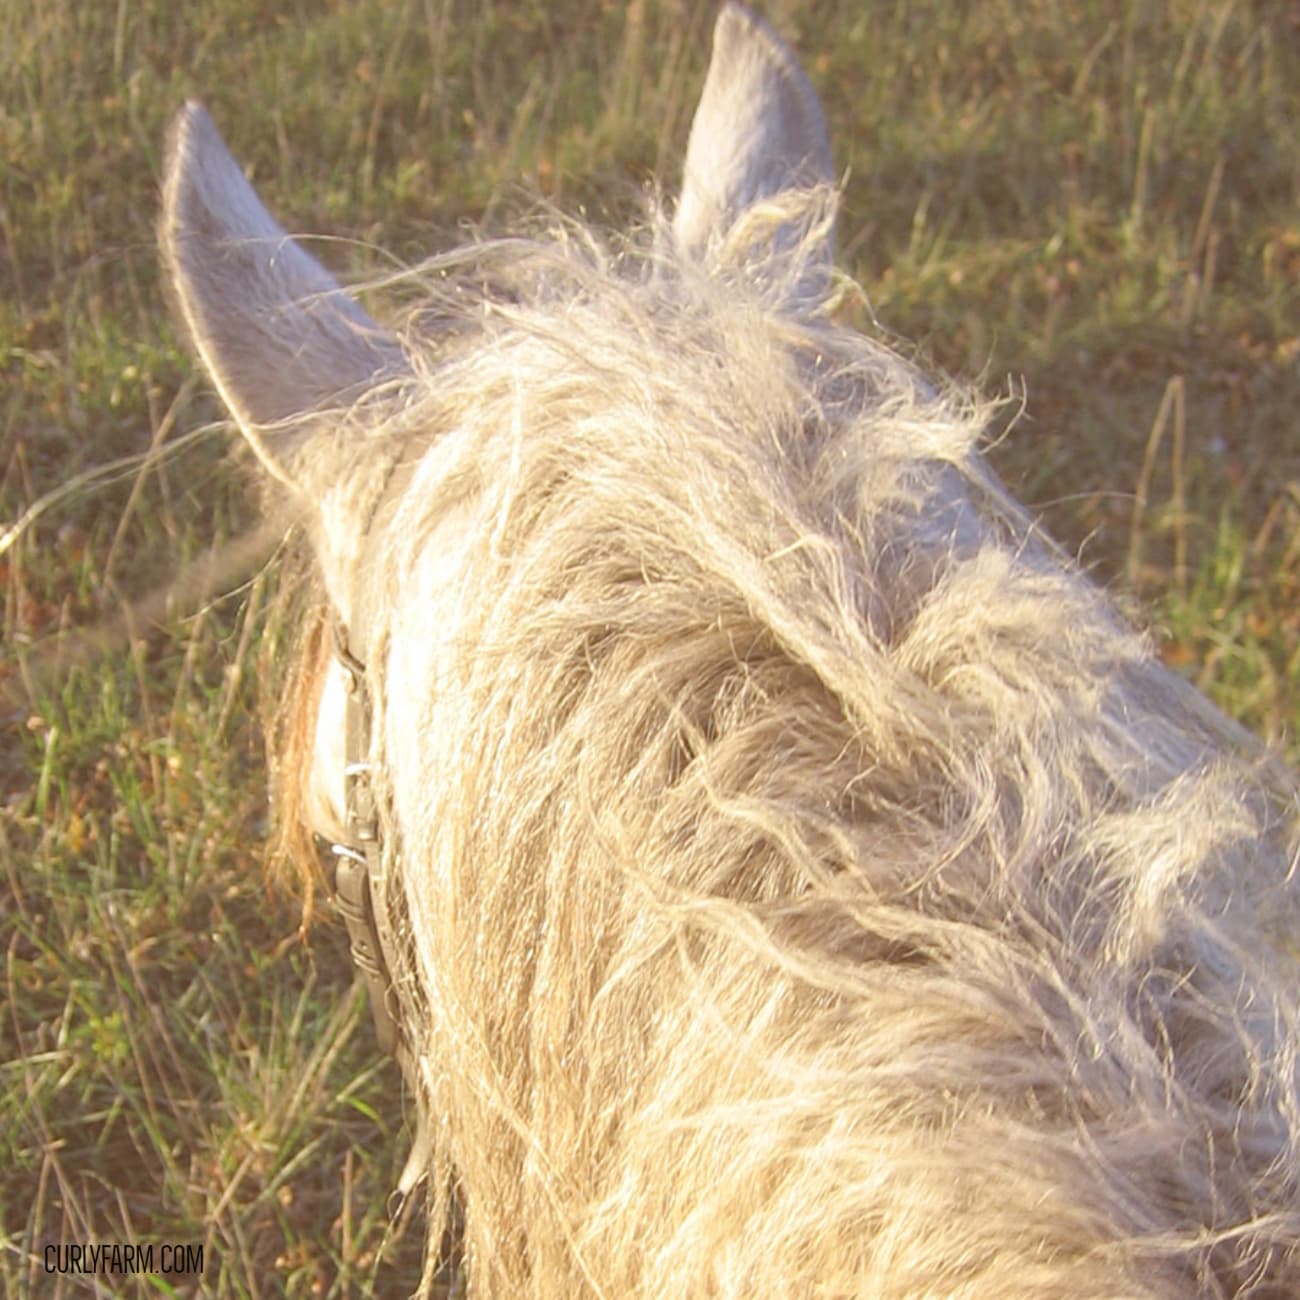 Horse with a split mane, shown from above.